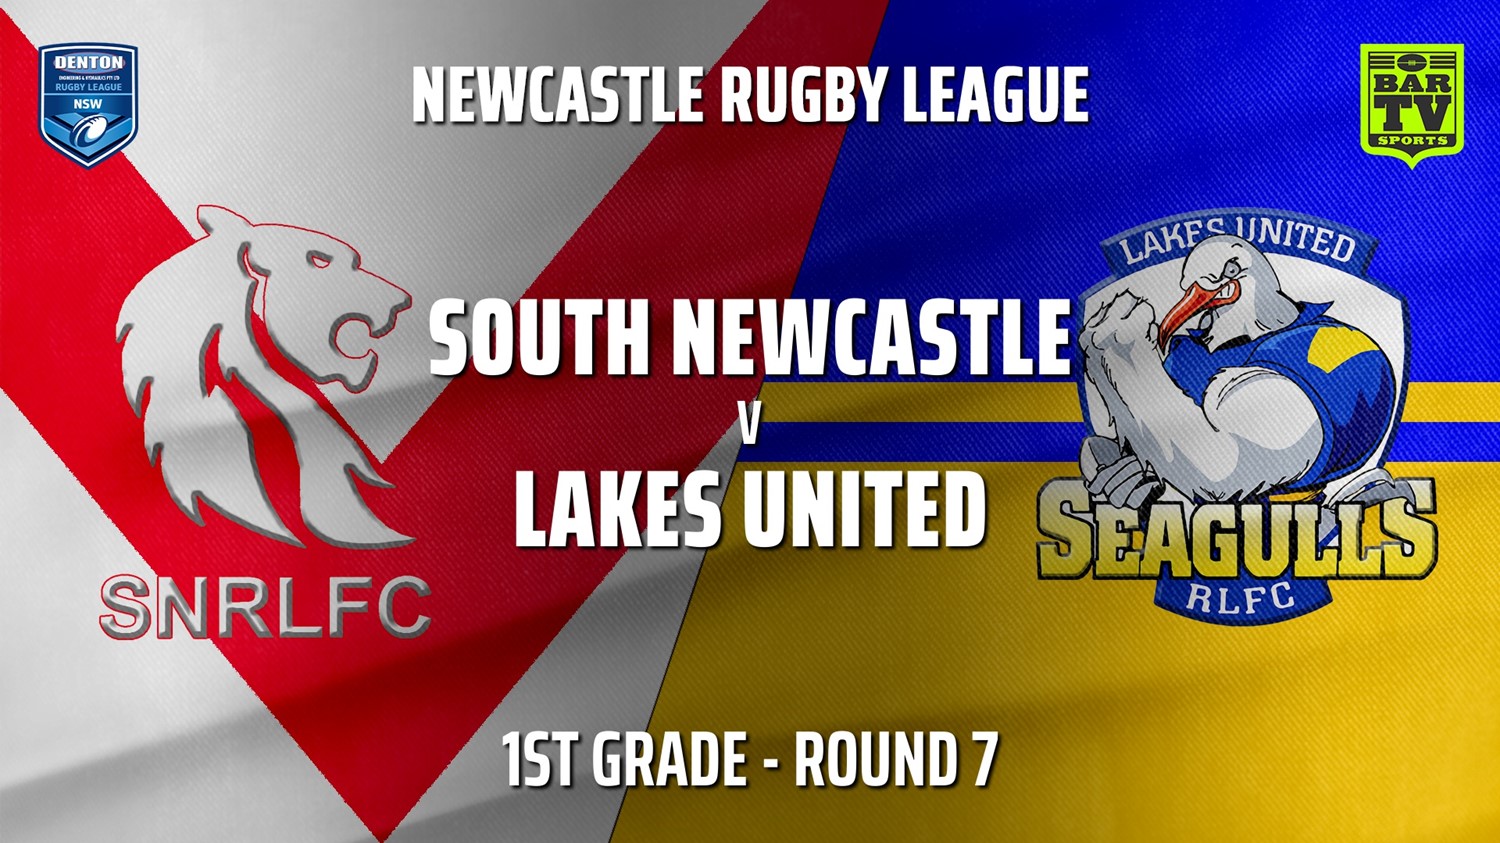 210508-Newcastle Rugby League Round 7 - 1st Grade - South Newcastle v Lakes United Slate Image